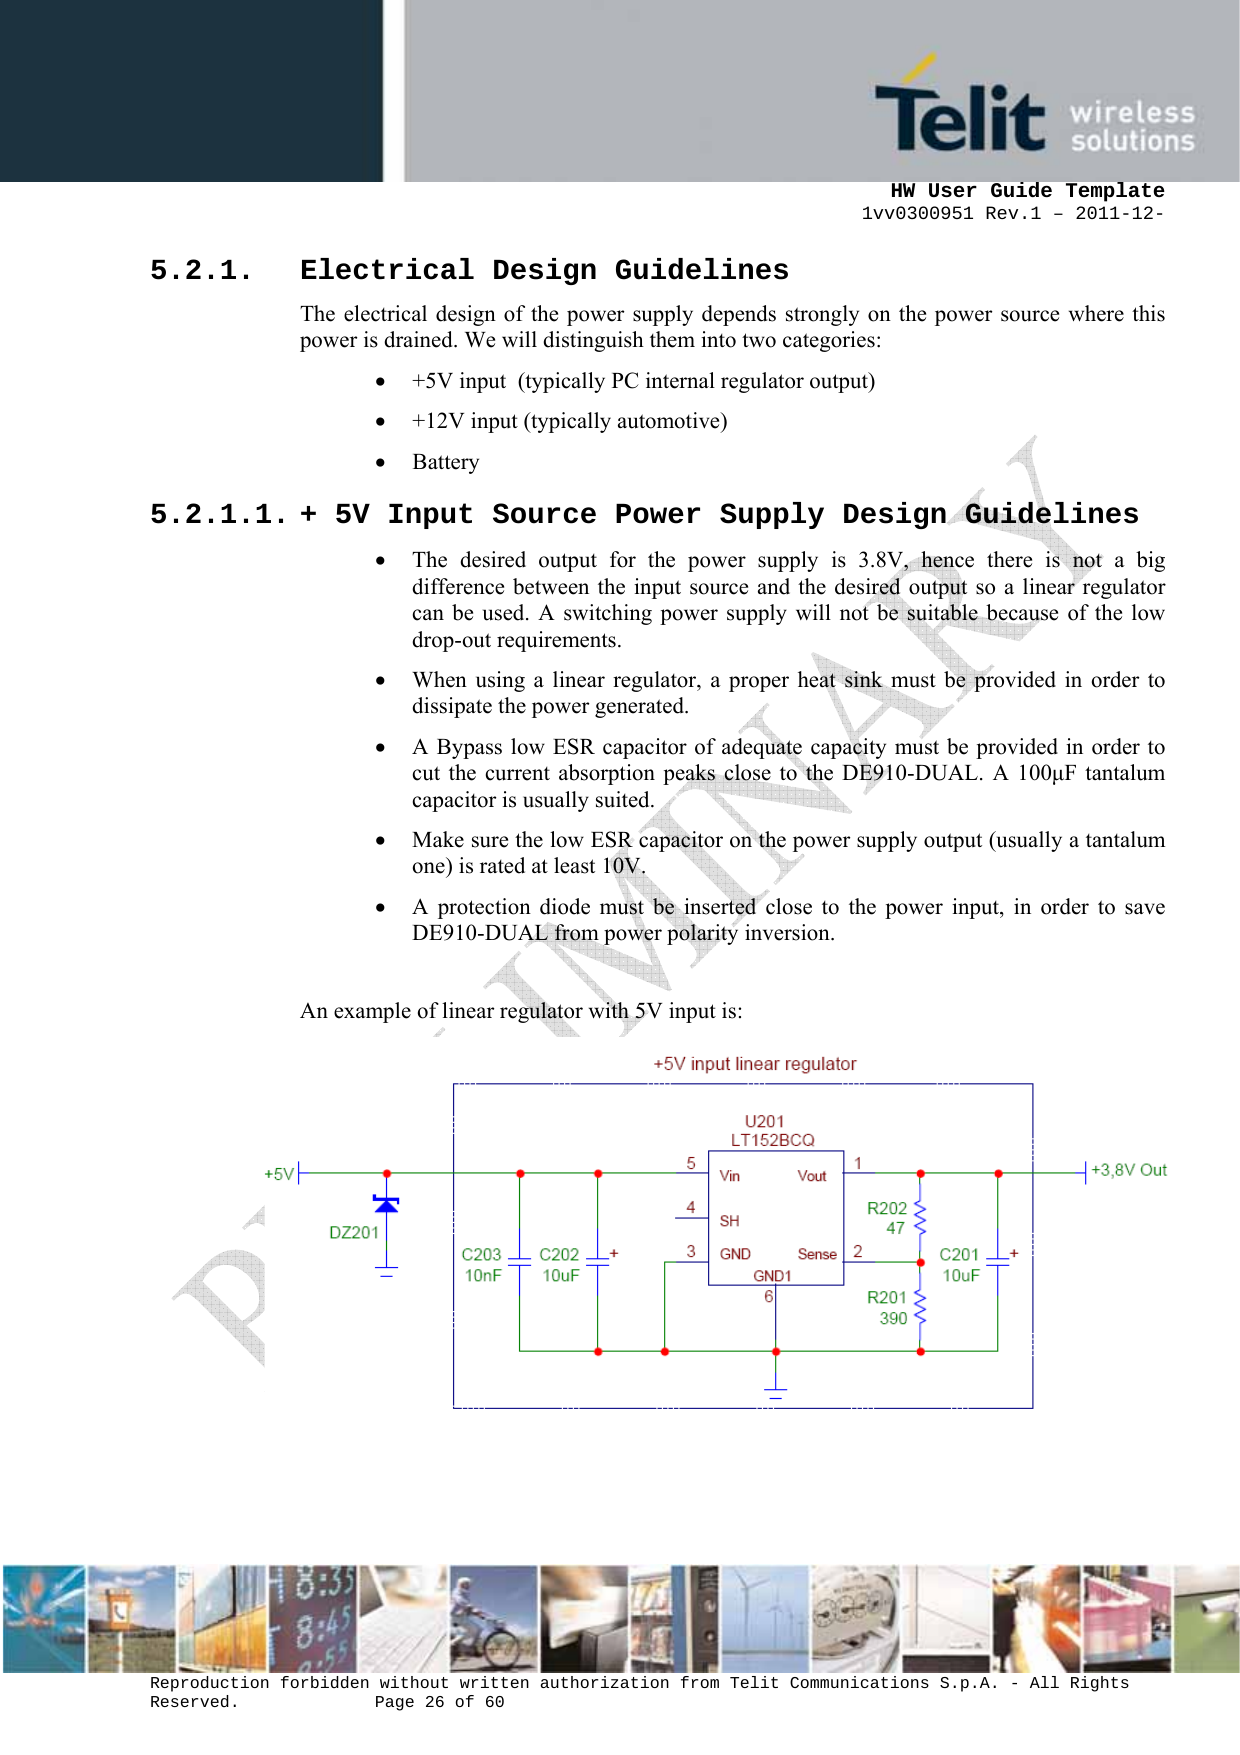      HW User Guide Template 1vv0300951 Rev.1 – 2011-12-  Reproduction forbidden without written authorization from Telit Communications S.p.A. - All Rights Reserved.    Page 26 of 60                                                     5.2.1. Electrical Design Guidelines The electrical design of the power supply depends strongly on the power source where this power is drained. We will distinguish them into two categories: • +5V input  (typically PC internal regulator output) • +12V input (typically automotive) • Battery 5.2.1.1. + 5V Input Source Power Supply Design Guidelines • The desired output for the power supply is 3.8V, hence there is not a big difference between the input source and the desired output so a linear regulator can be used. A switching power supply will not be suitable because of the low drop-out requirements. • When using a linear regulator, a proper heat sink must be provided in order to dissipate the power generated. • A Bypass low ESR capacitor of adequate capacity must be provided in order to cut the current absorption peaks close to the DE910-DUAL. A 100µF tantalum capacitor is usually suited. • Make sure the low ESR capacitor on the power supply output (usually a tantalum one) is rated at least 10V. • A protection diode must be inserted close to the power input, in order to save DE910-DUAL from power polarity inversion.  An example of linear regulator with 5V input is:            